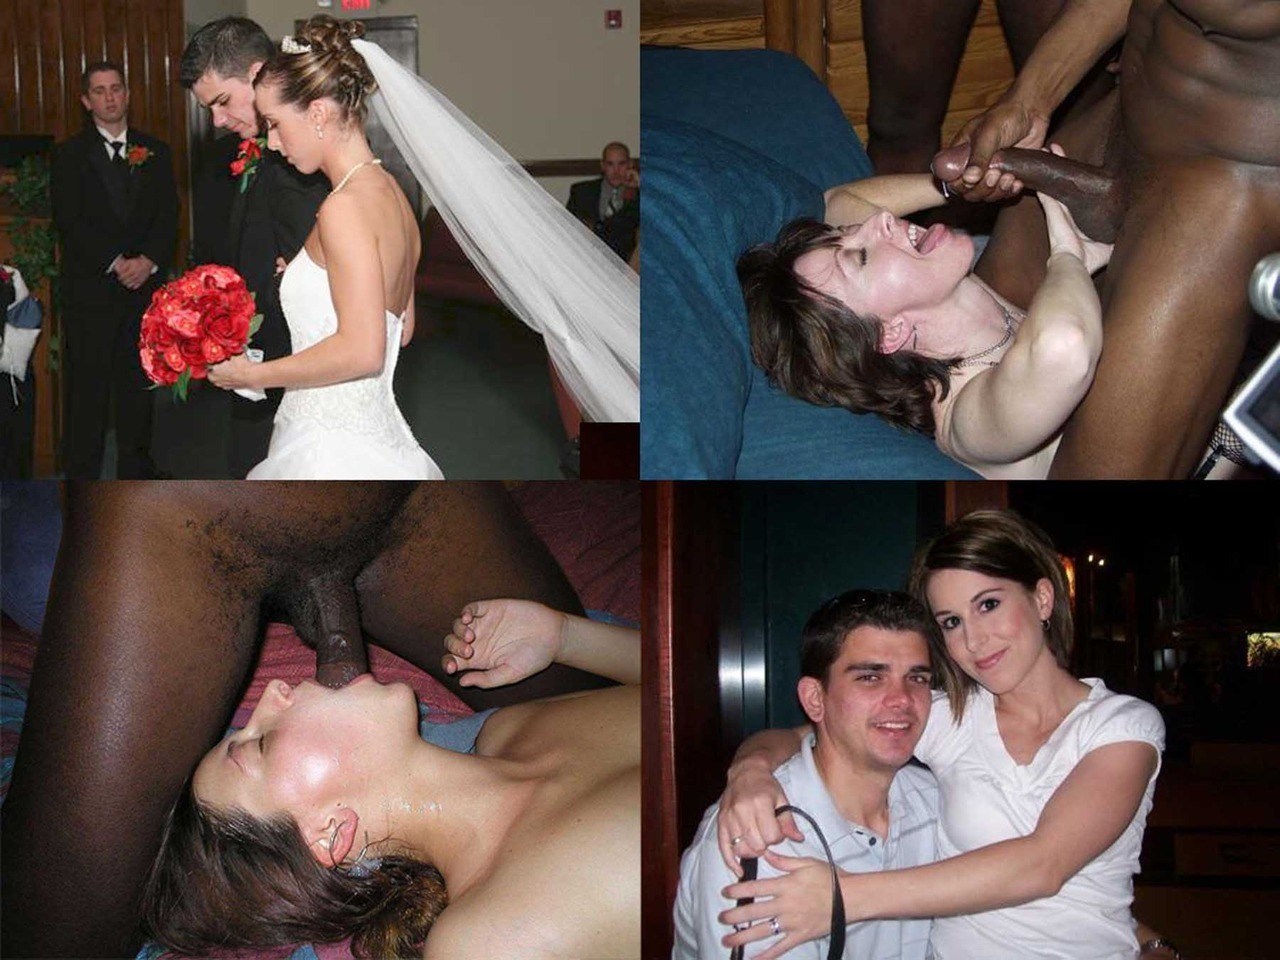 Sex with his wife on their wedding night (49 photos) picture image